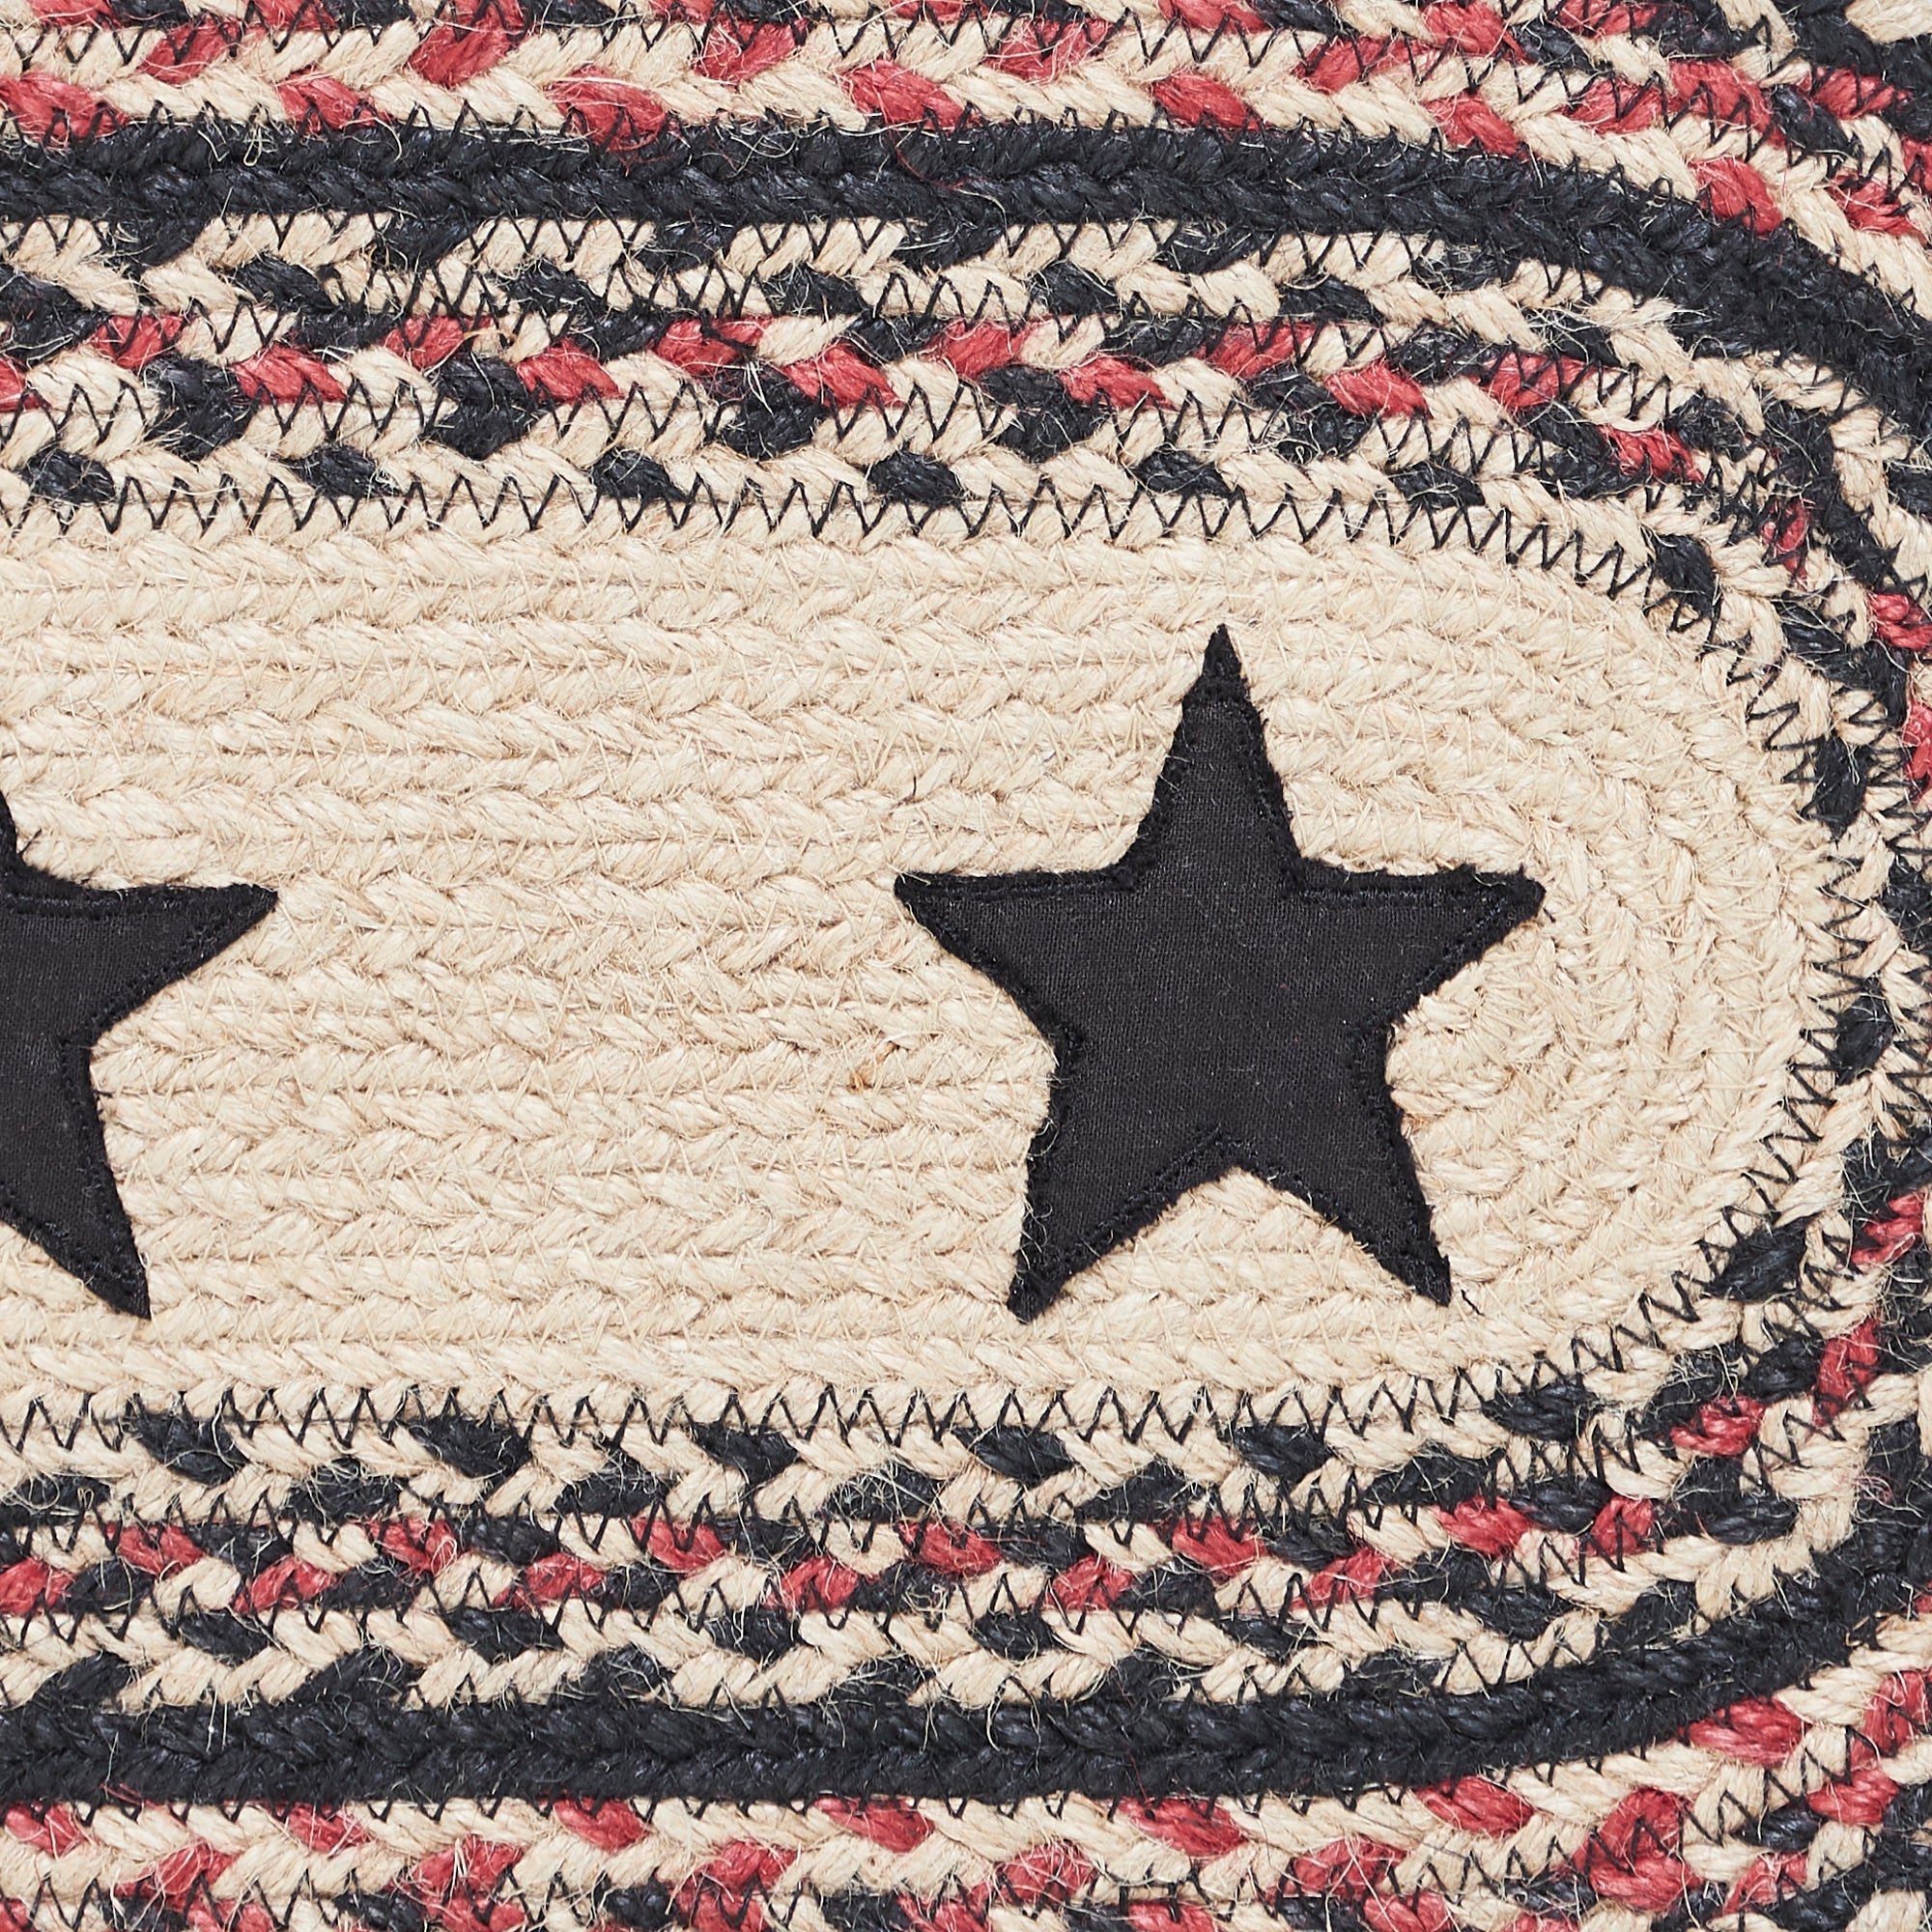 Colonial Star Jute Braided Oval Runner 13x48 VHC Brands